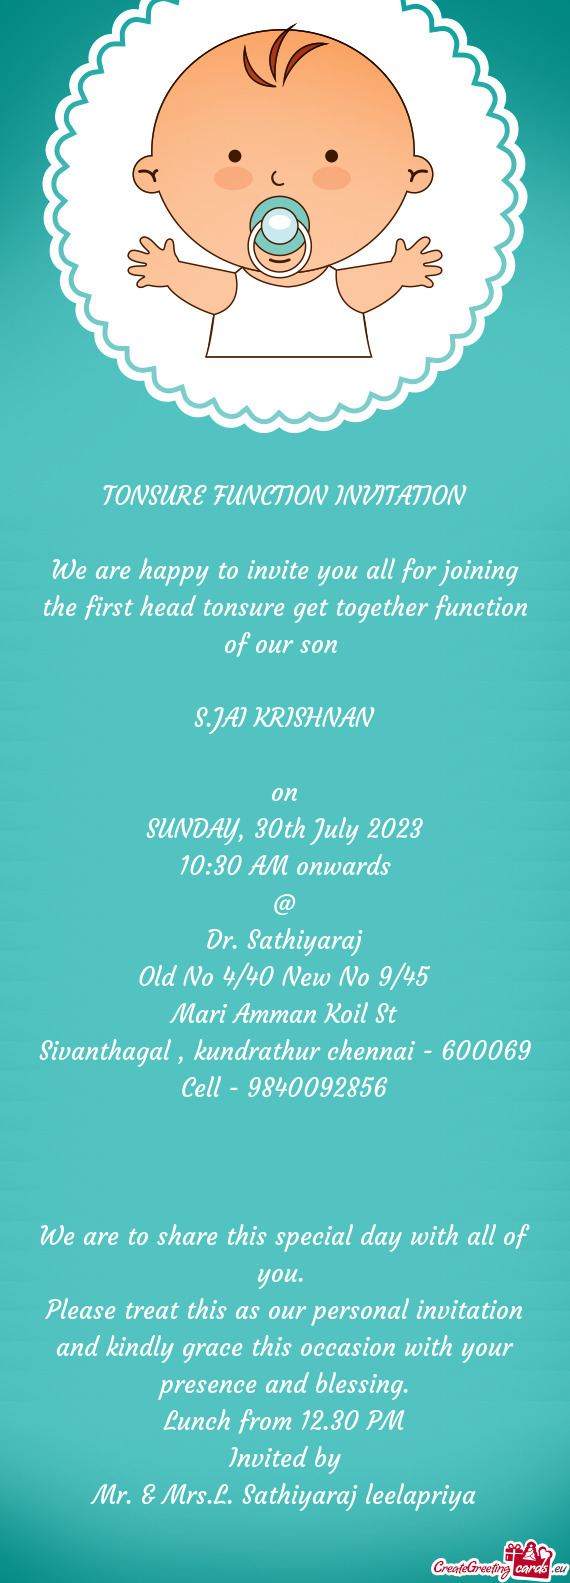 We are happy to invite you all for joining the first head tonsure get together function of our son